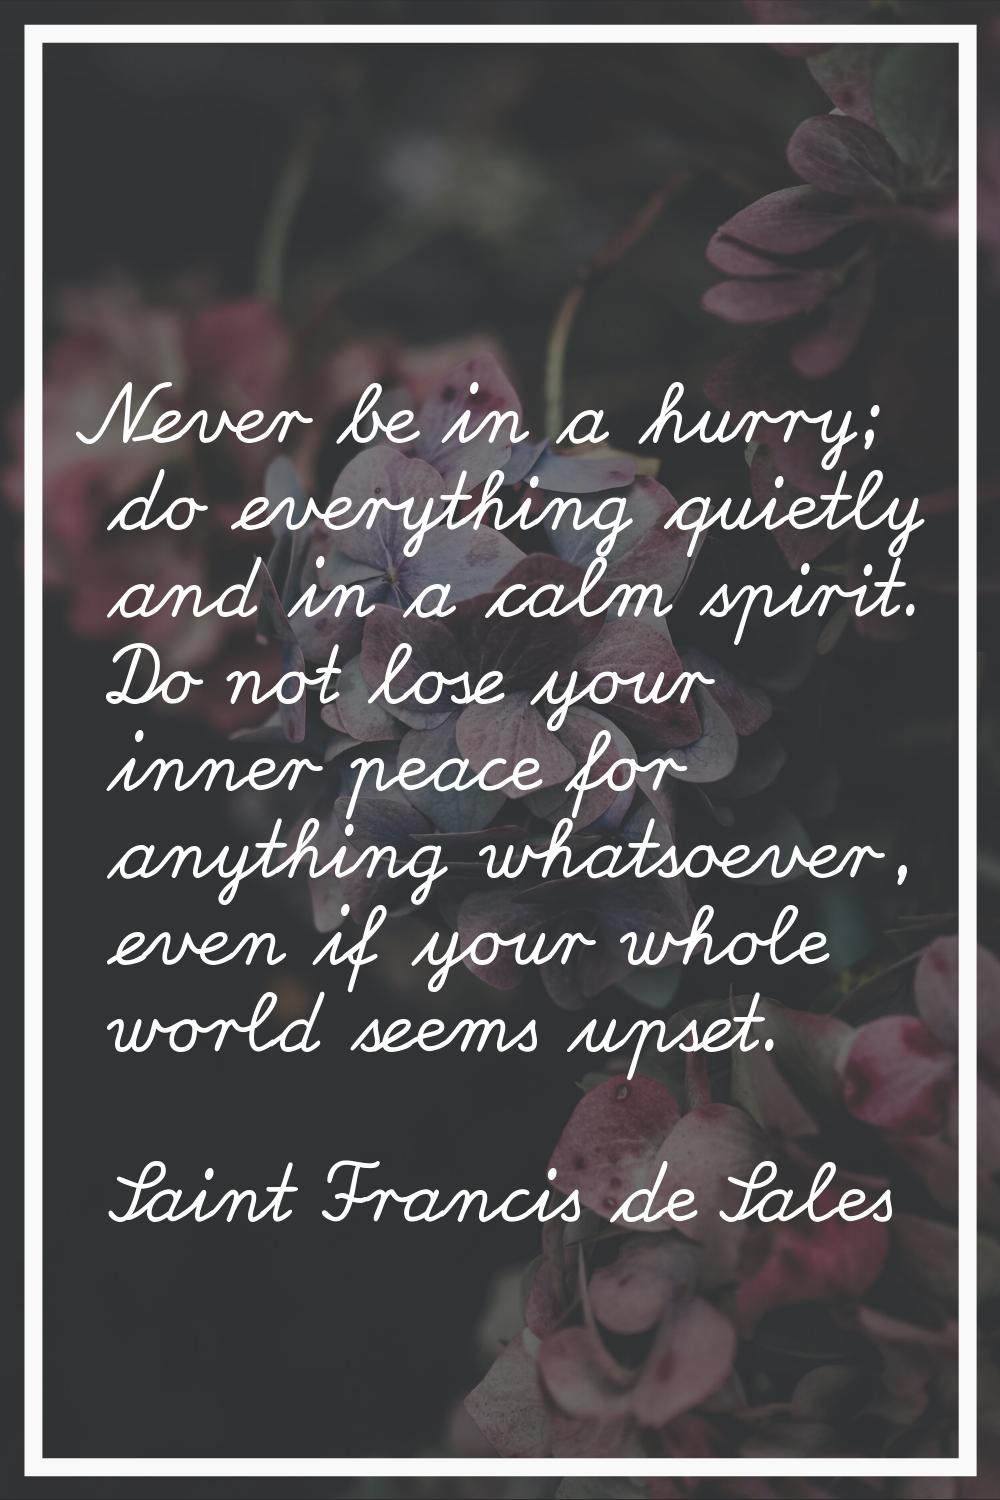 Never be in a hurry; do everything quietly and in a calm spirit. Do not lose your inner peace for a